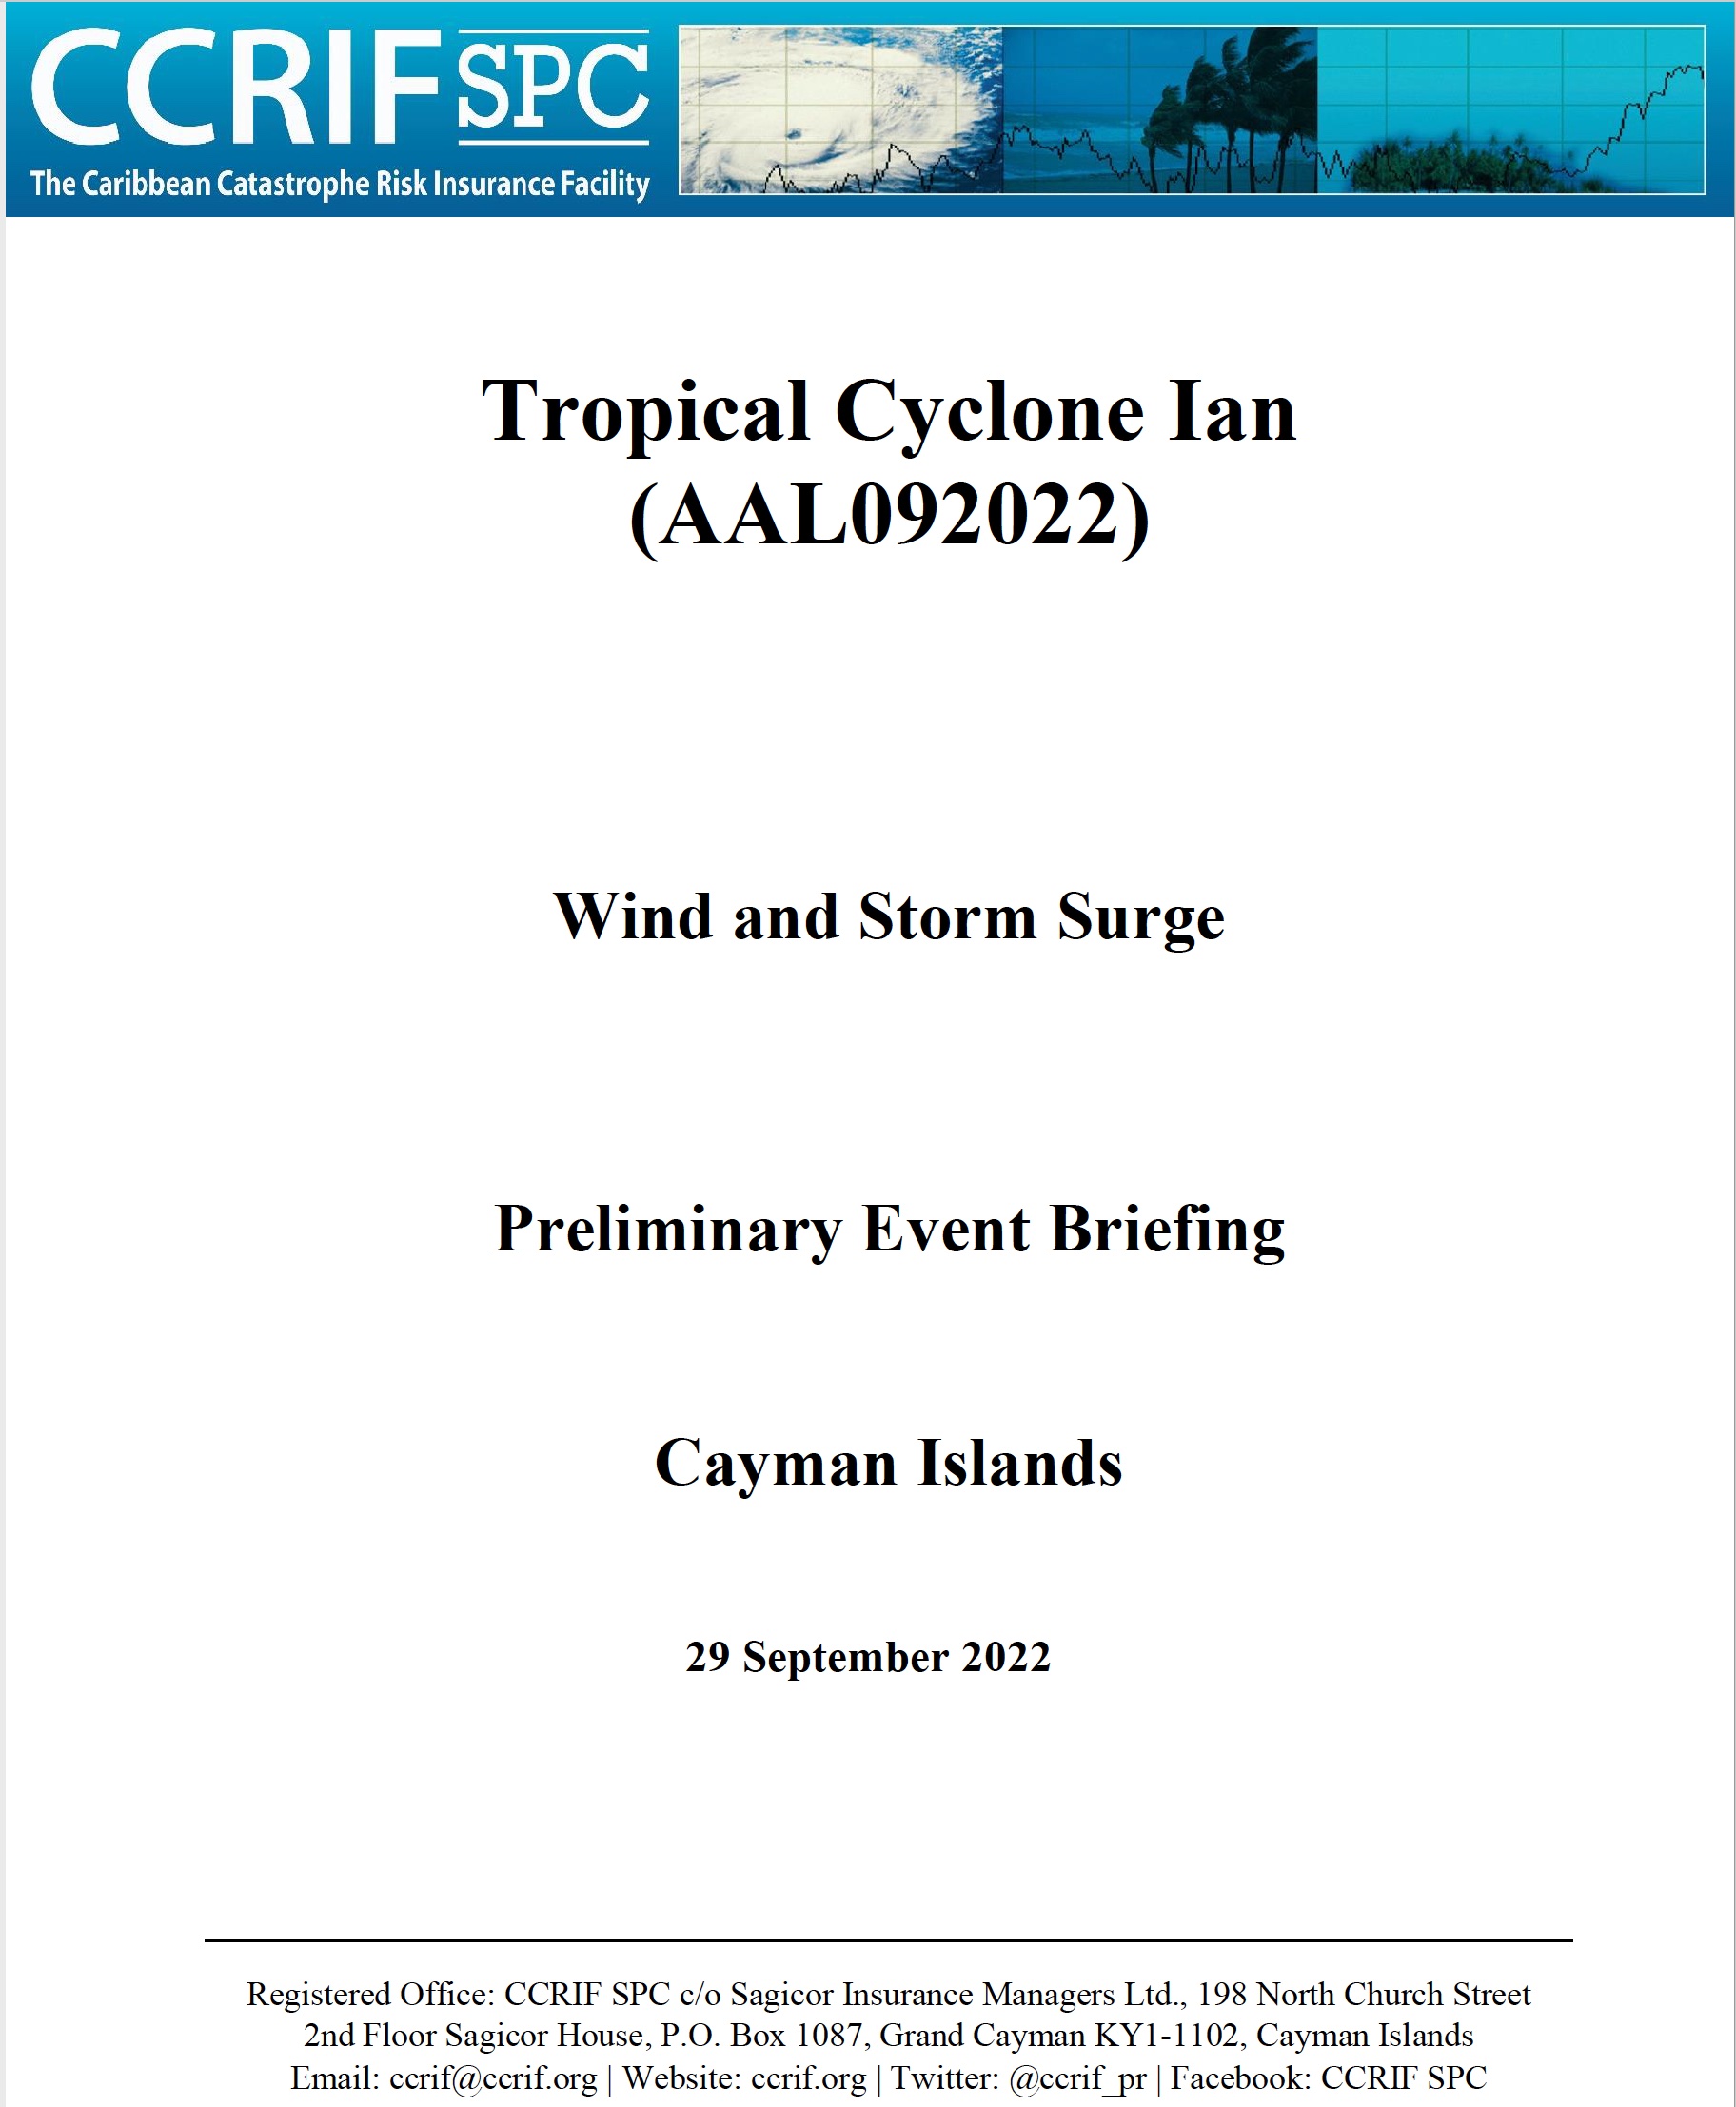 Preliminary Event Briefing - Wind and Storm Surge - TC Ian - Cayman Islands - September 29 2022